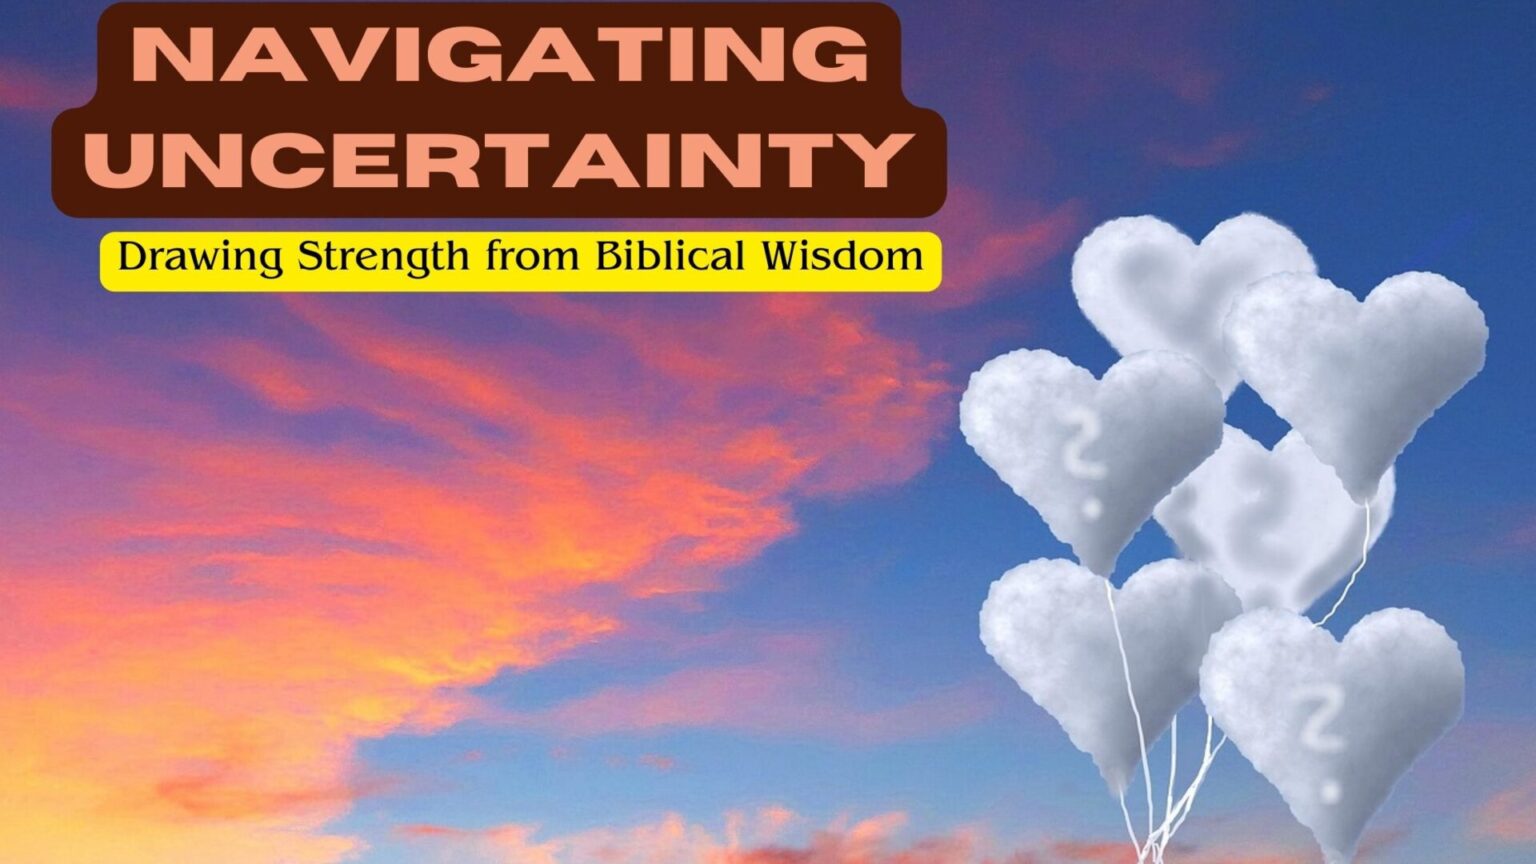 Navigating Uncertainty: Drawing Strength from Biblical Wisdom